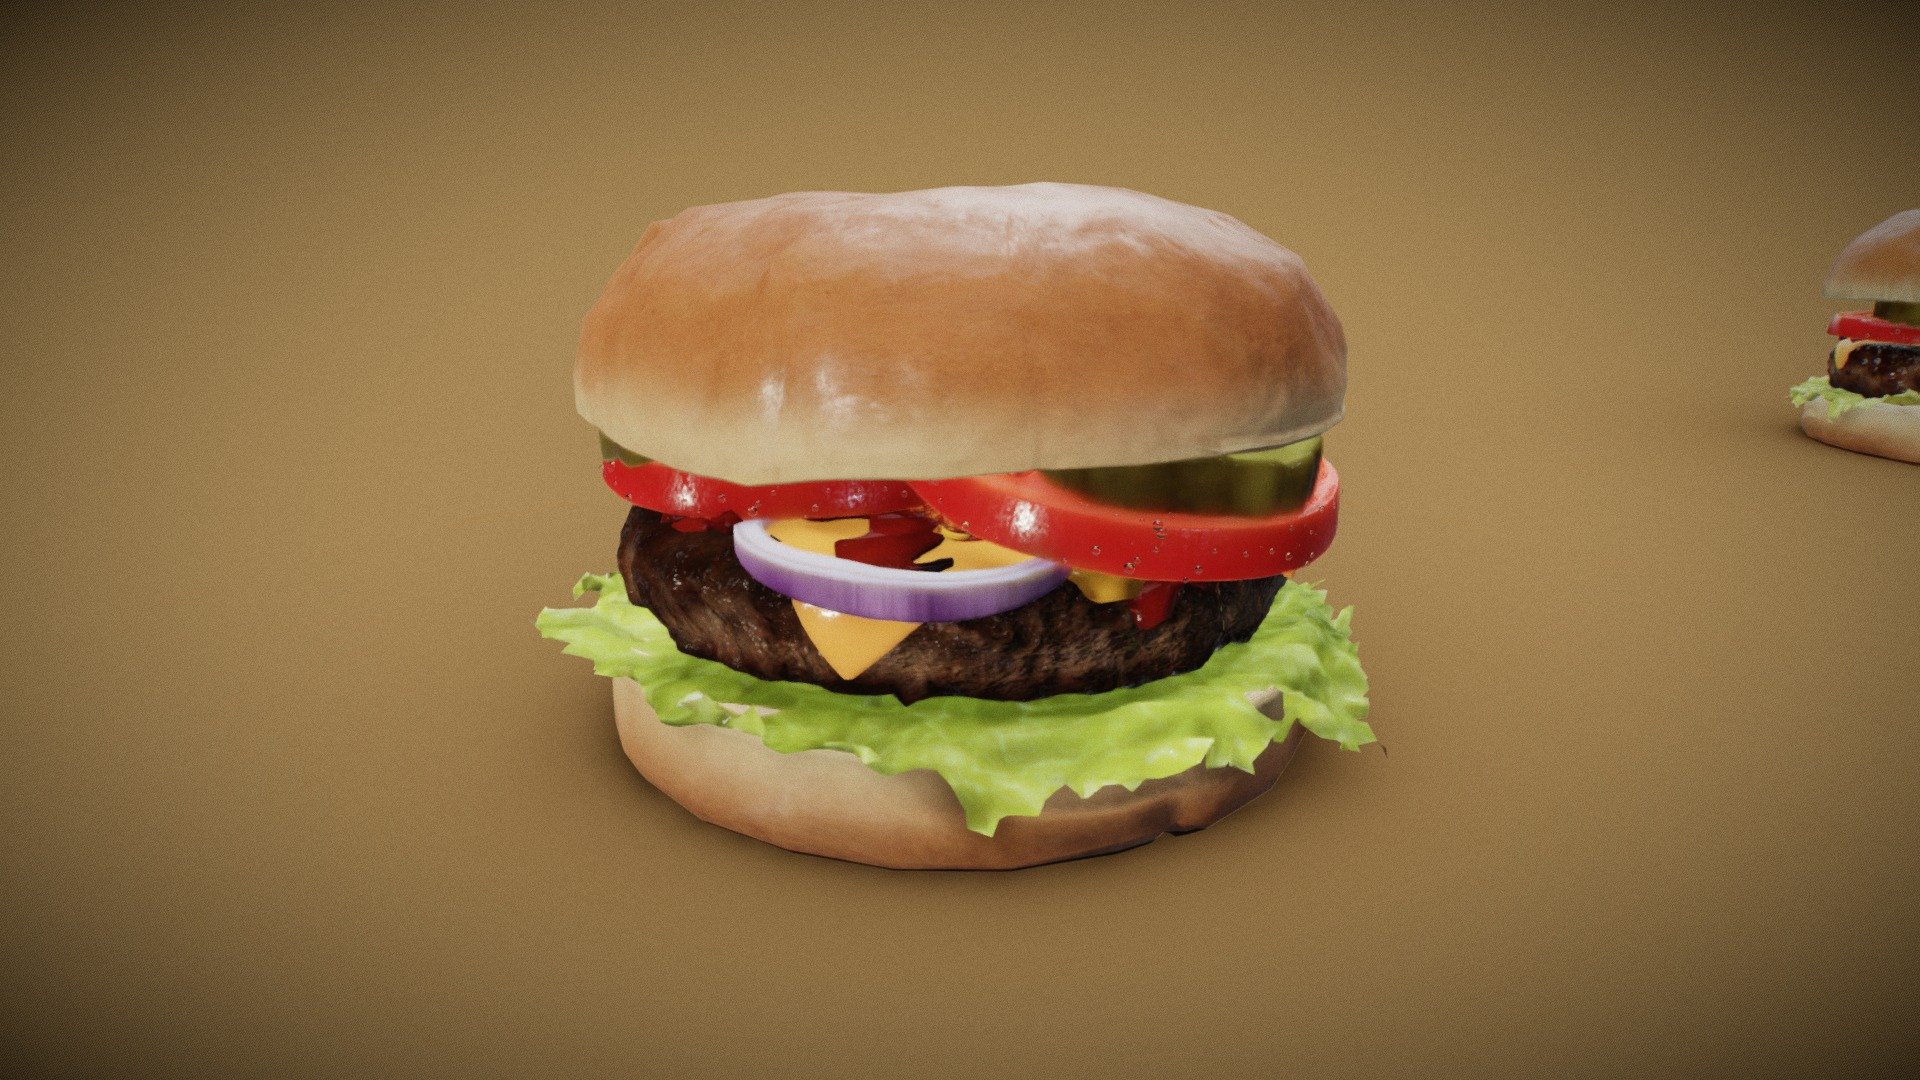 Realtime PBR model  ready to use in your applications,  this version is reduced to a single material  if You need more quality 

The LOD 3 allows you to use subdvisions or tesselation to the model.

Bonus : * Included the blender file  with single texture multi material  elements  allowing much more details and realism * - Burger - Buy Royalty Free 3D model by EVERMORE3D 3d model